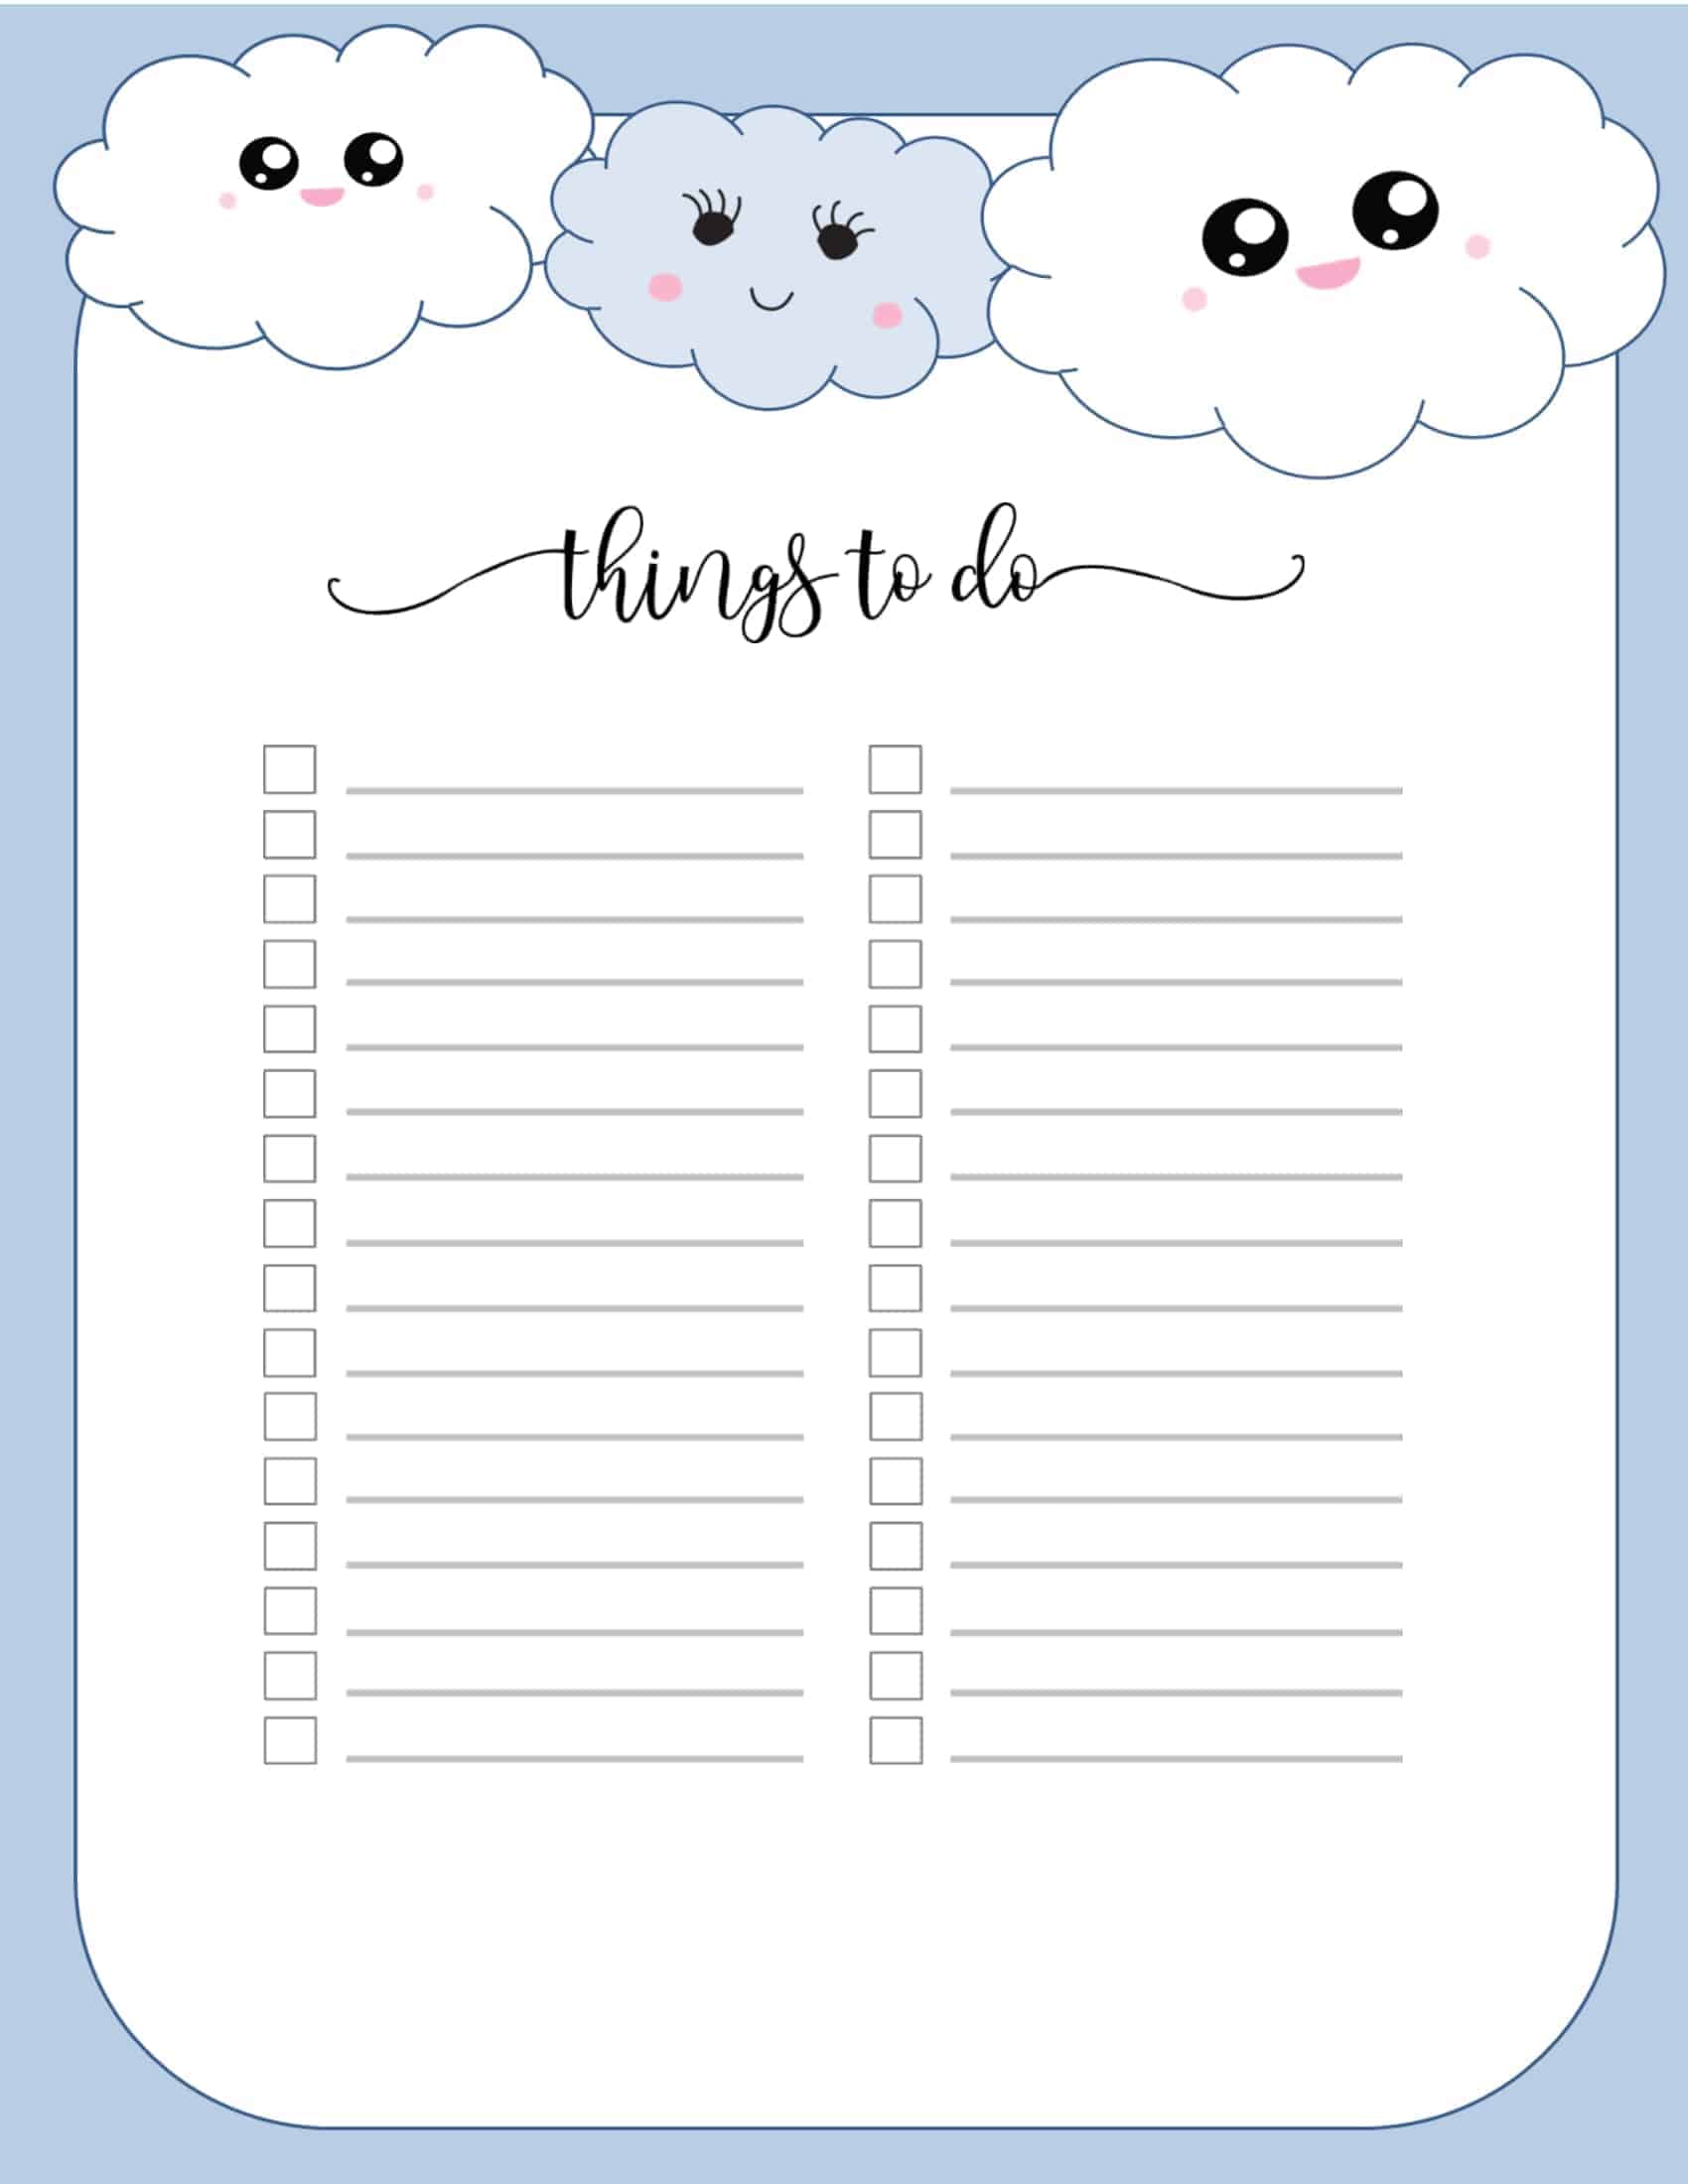 cute-free-printable-daily-to-do-list-template-printable-templates